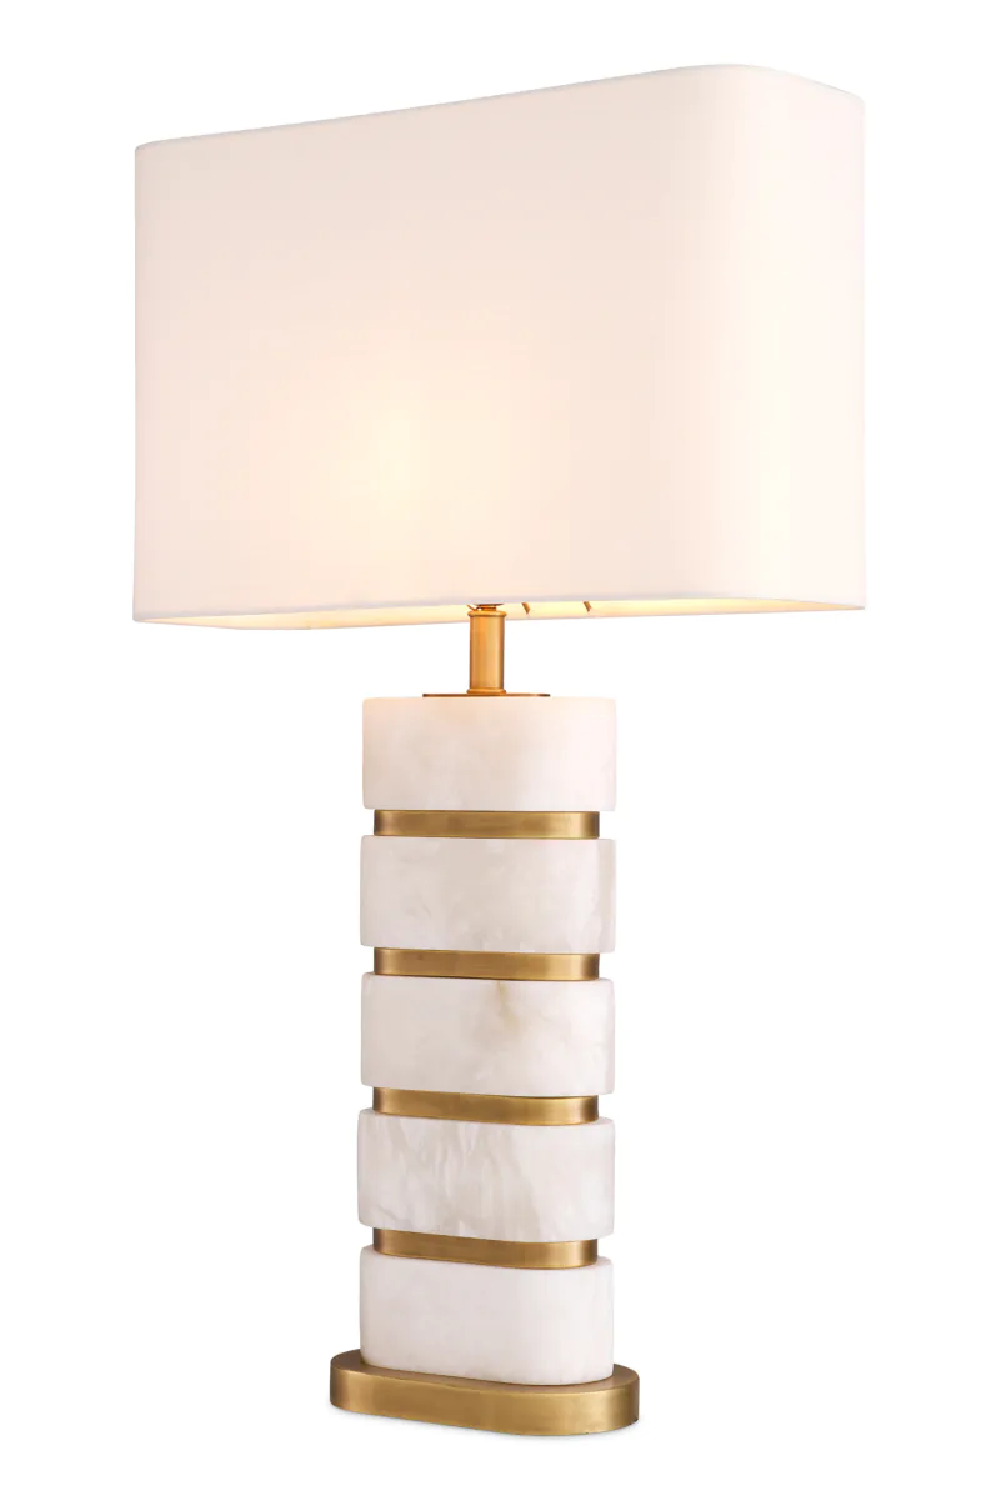 Image of White Modern Table Lamp | Eichholtz Newall